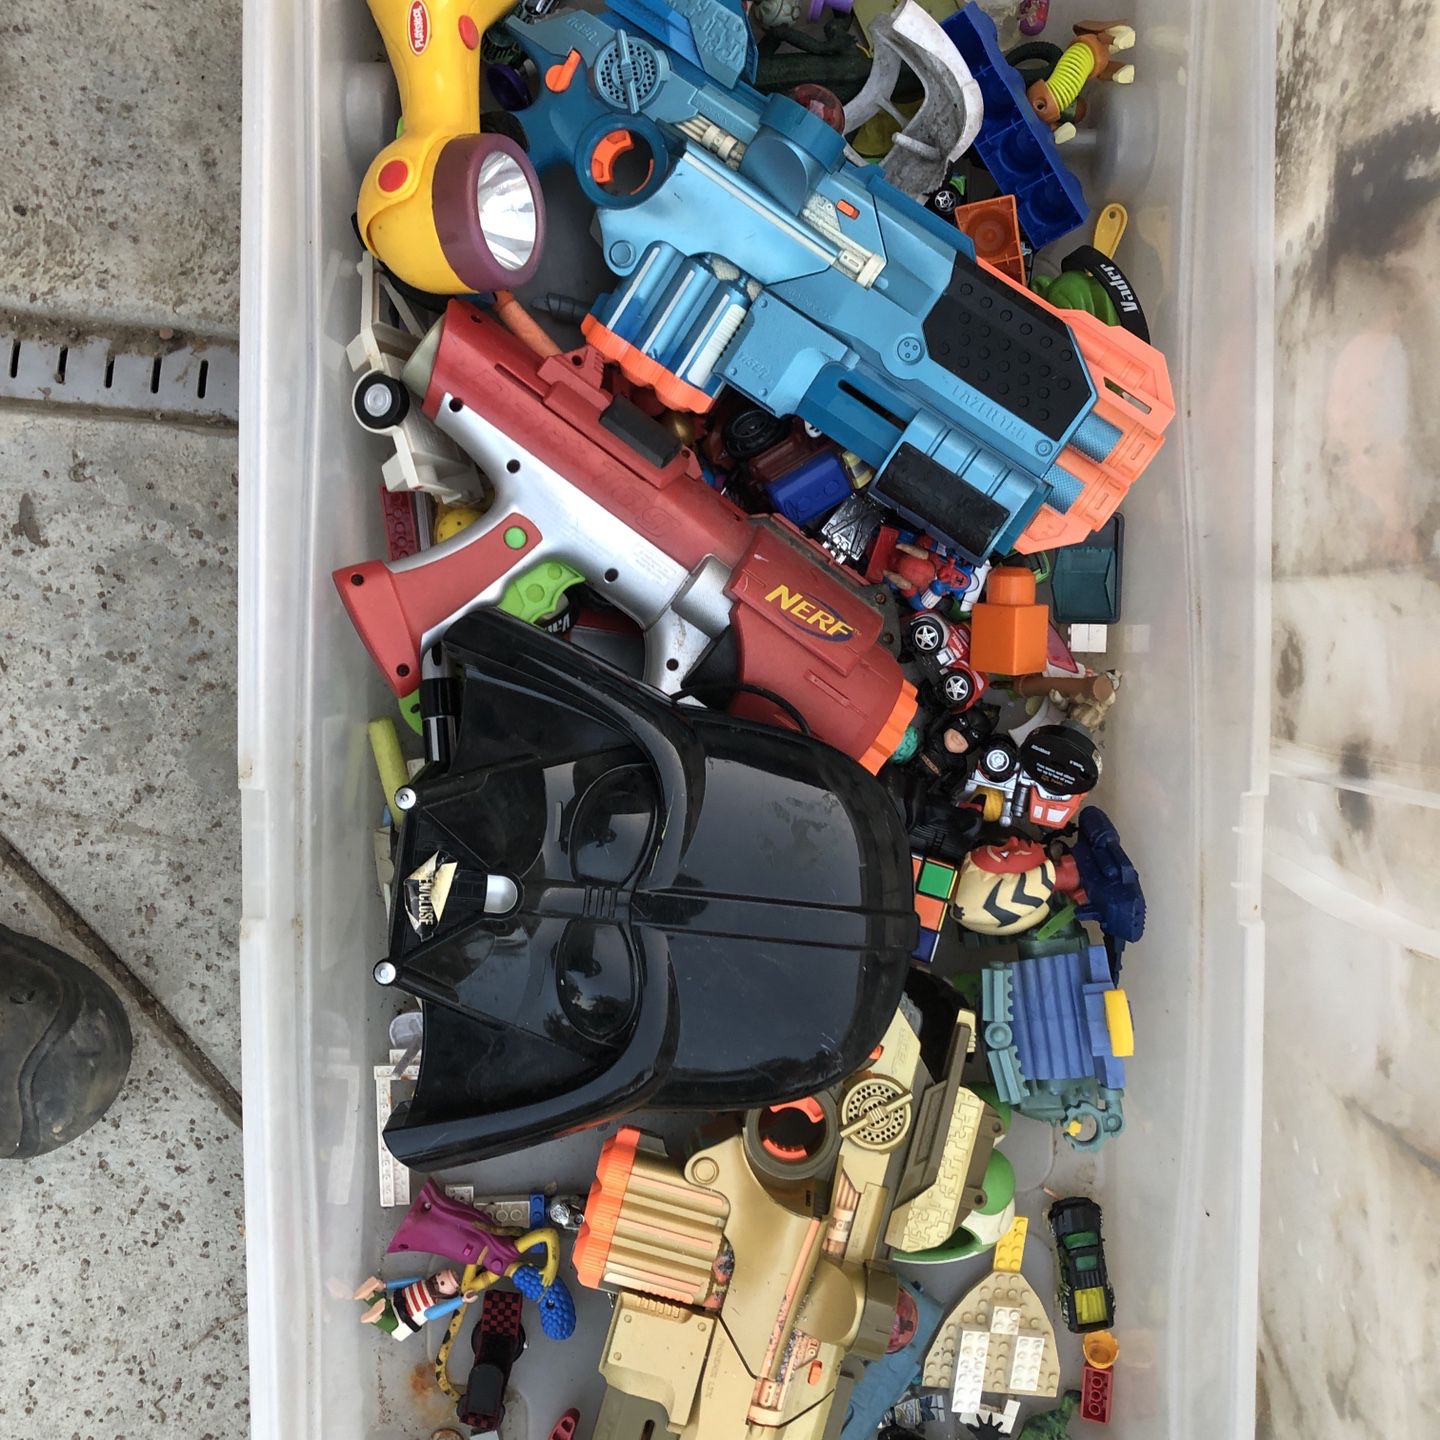 Miscellaneous box of toys from Star Wars and Nerf guns and a bunch other toys